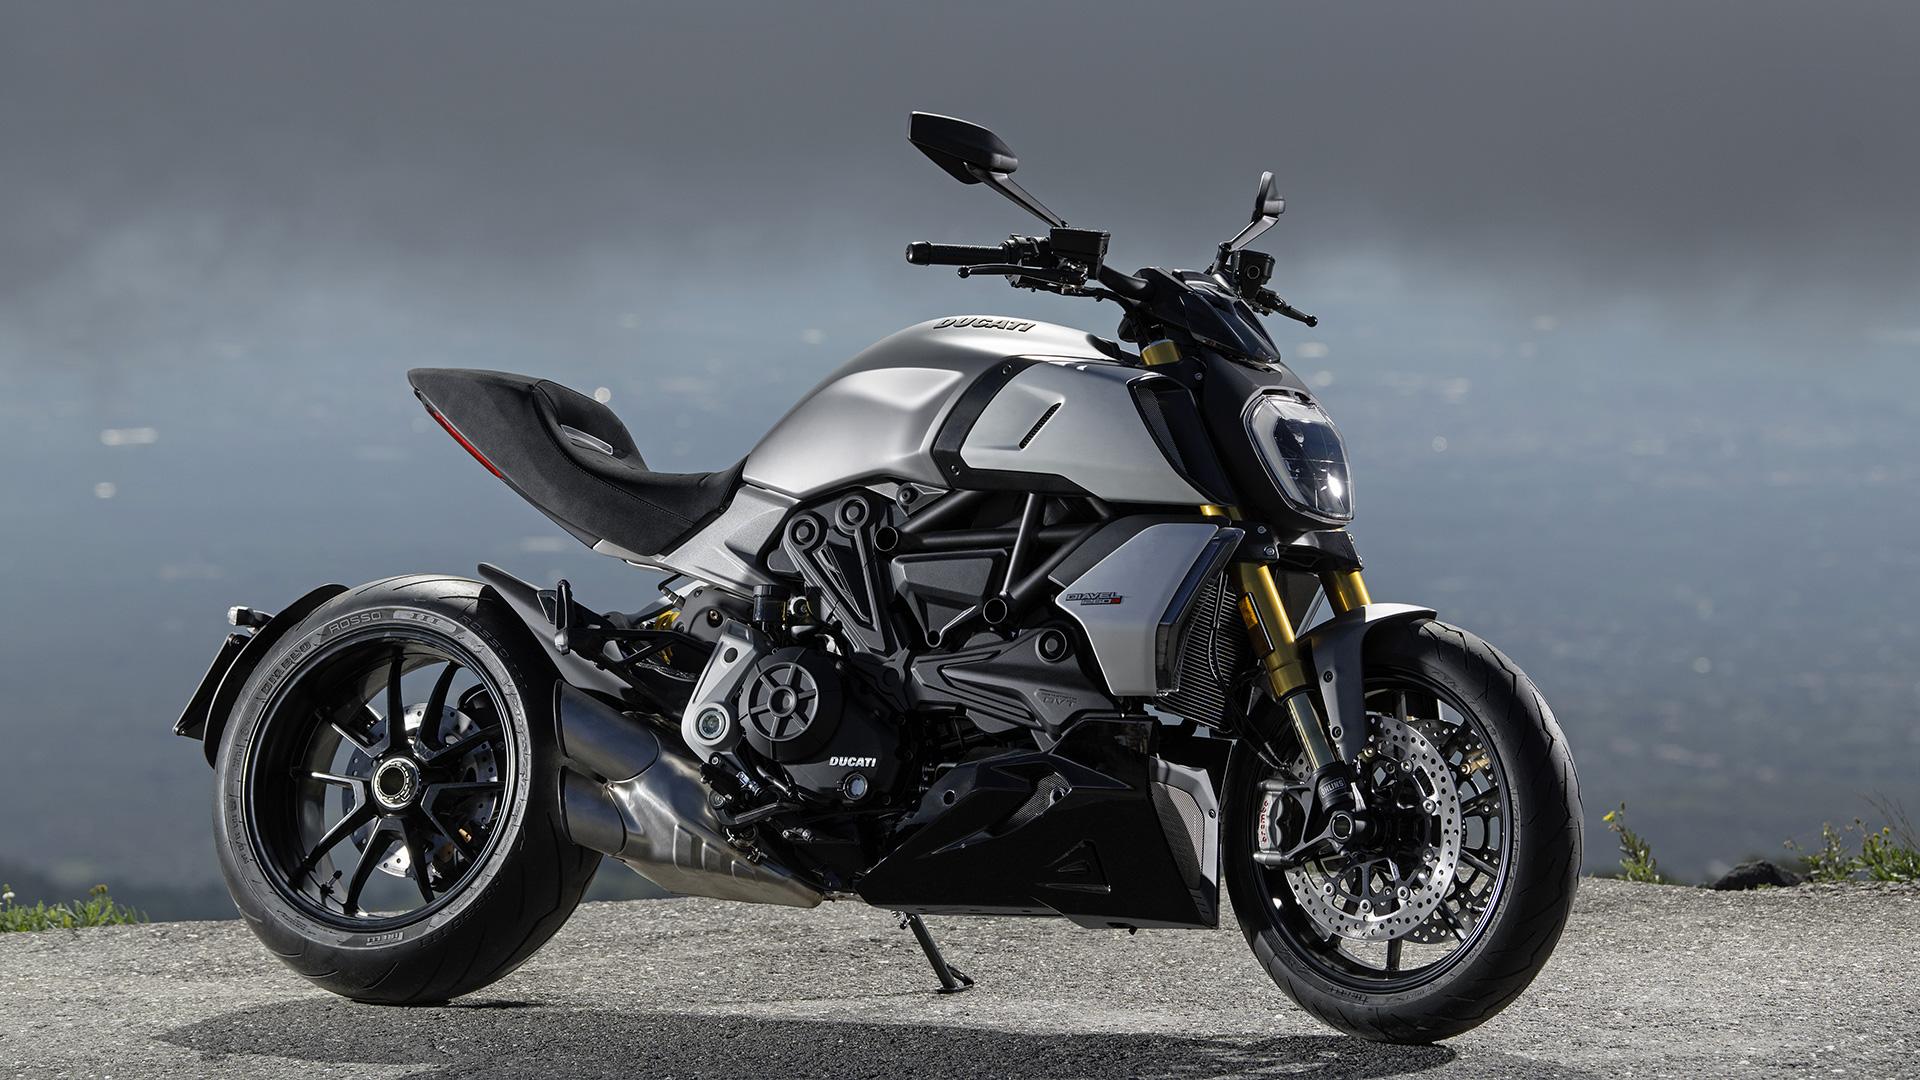 New Ducati Diavel 1260. The Maxi Naked Powerful And Muscular